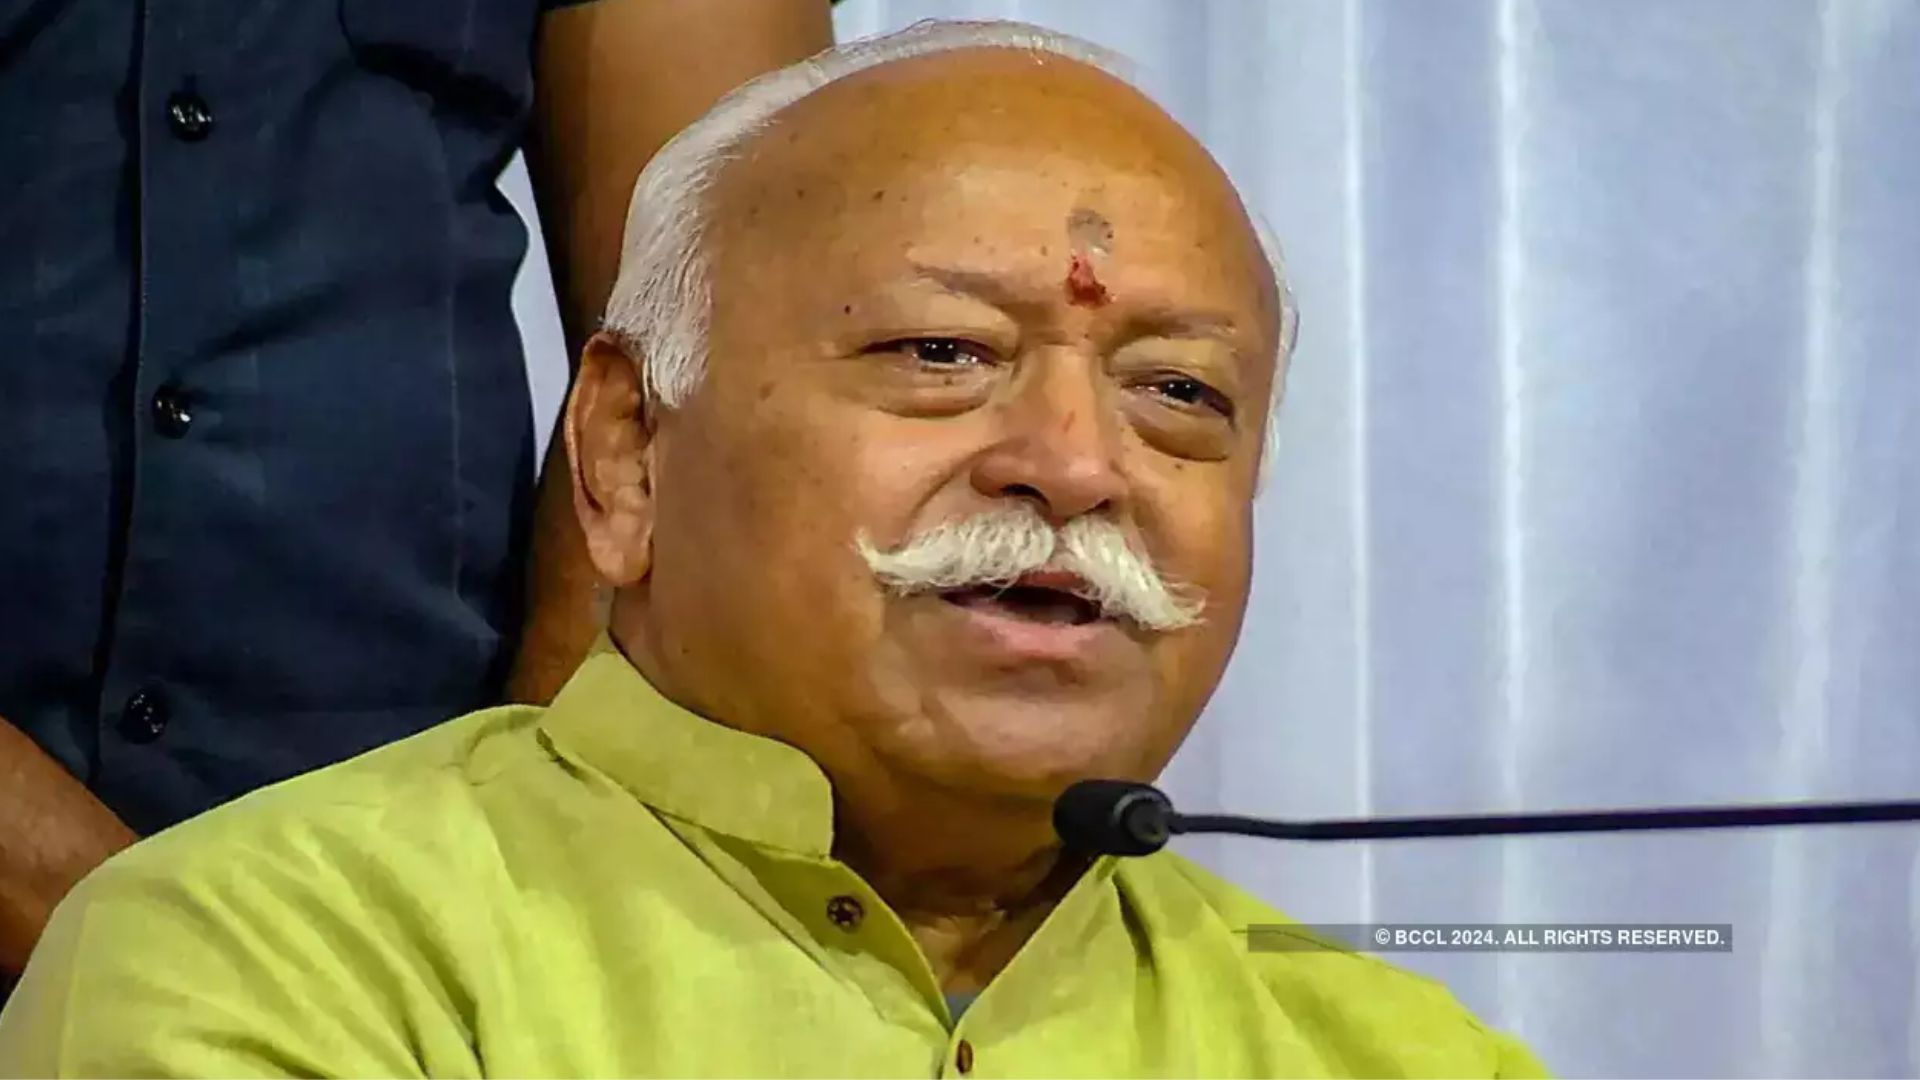 Mohan Bhagwat, the head of the RSS, will visit Jind, Haryana, for three days starting today